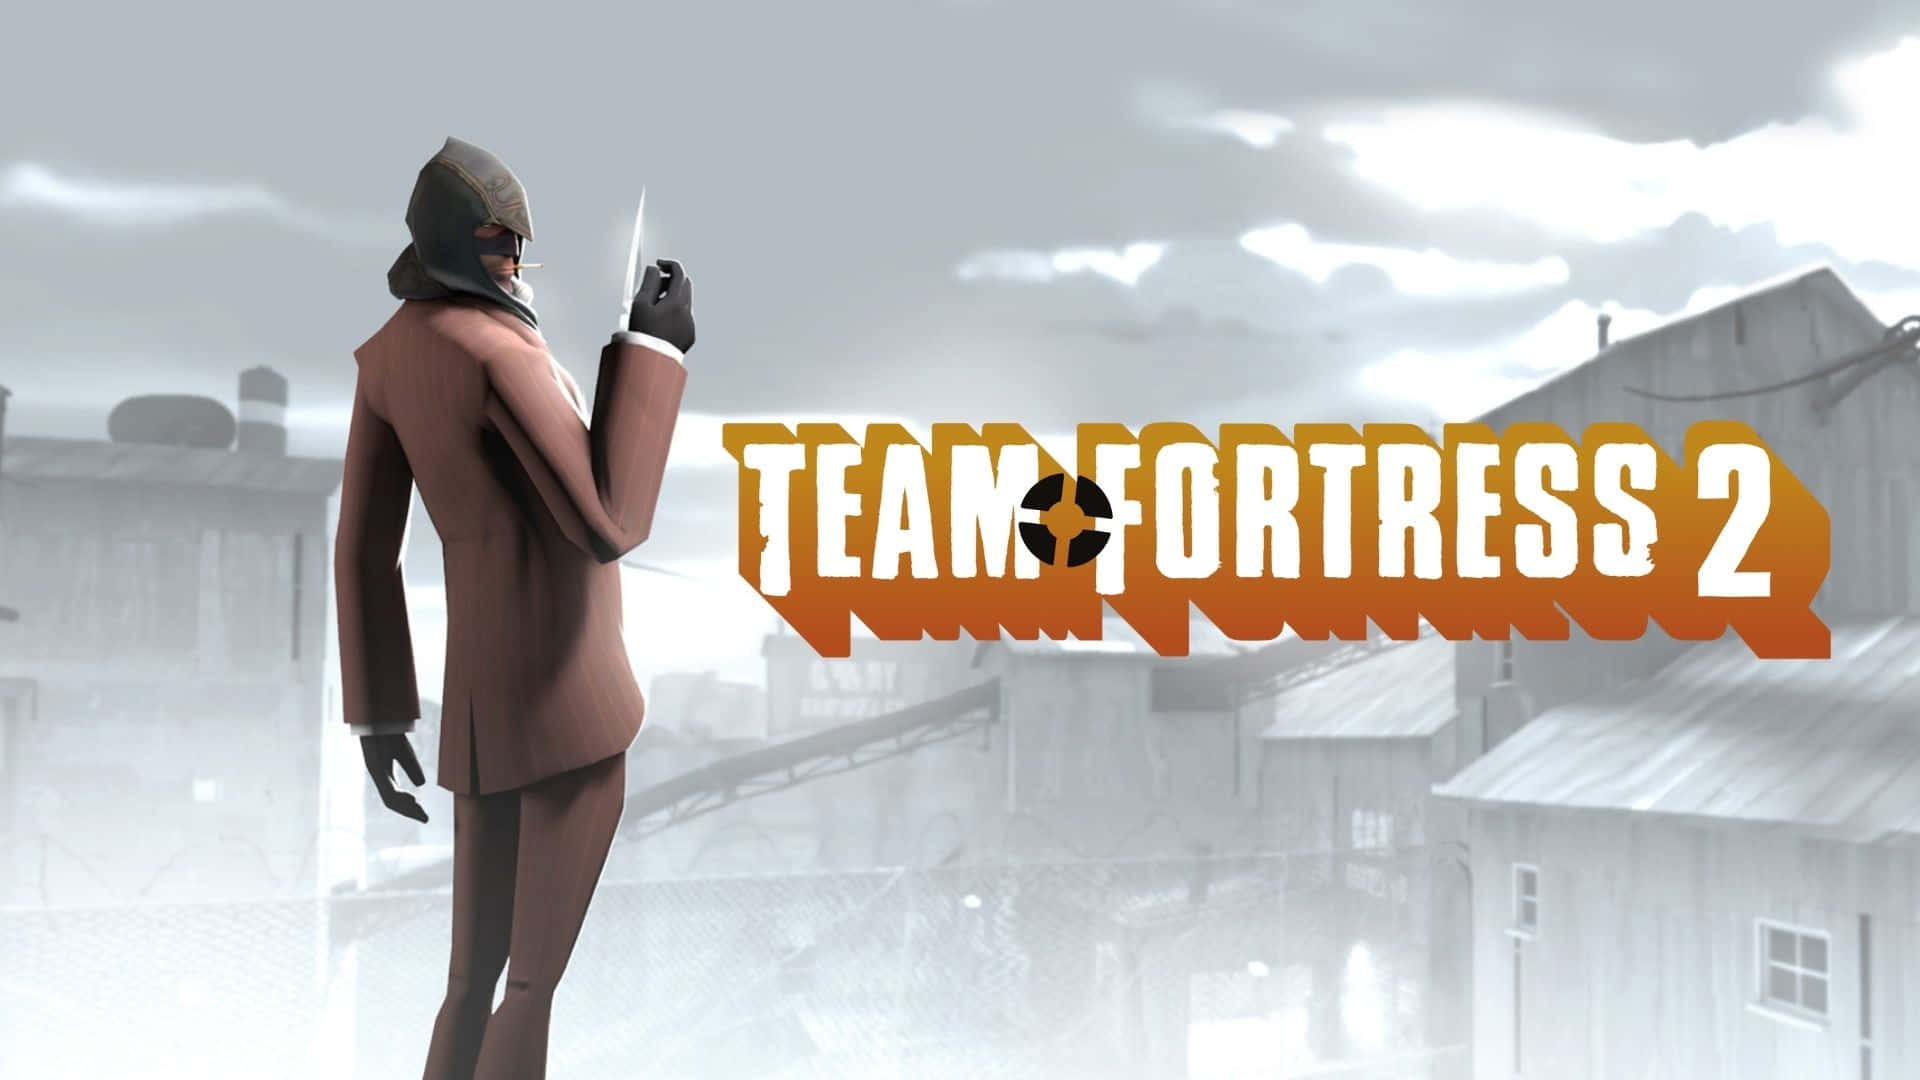 Ancient artefacts in the world of Team Fortress 2